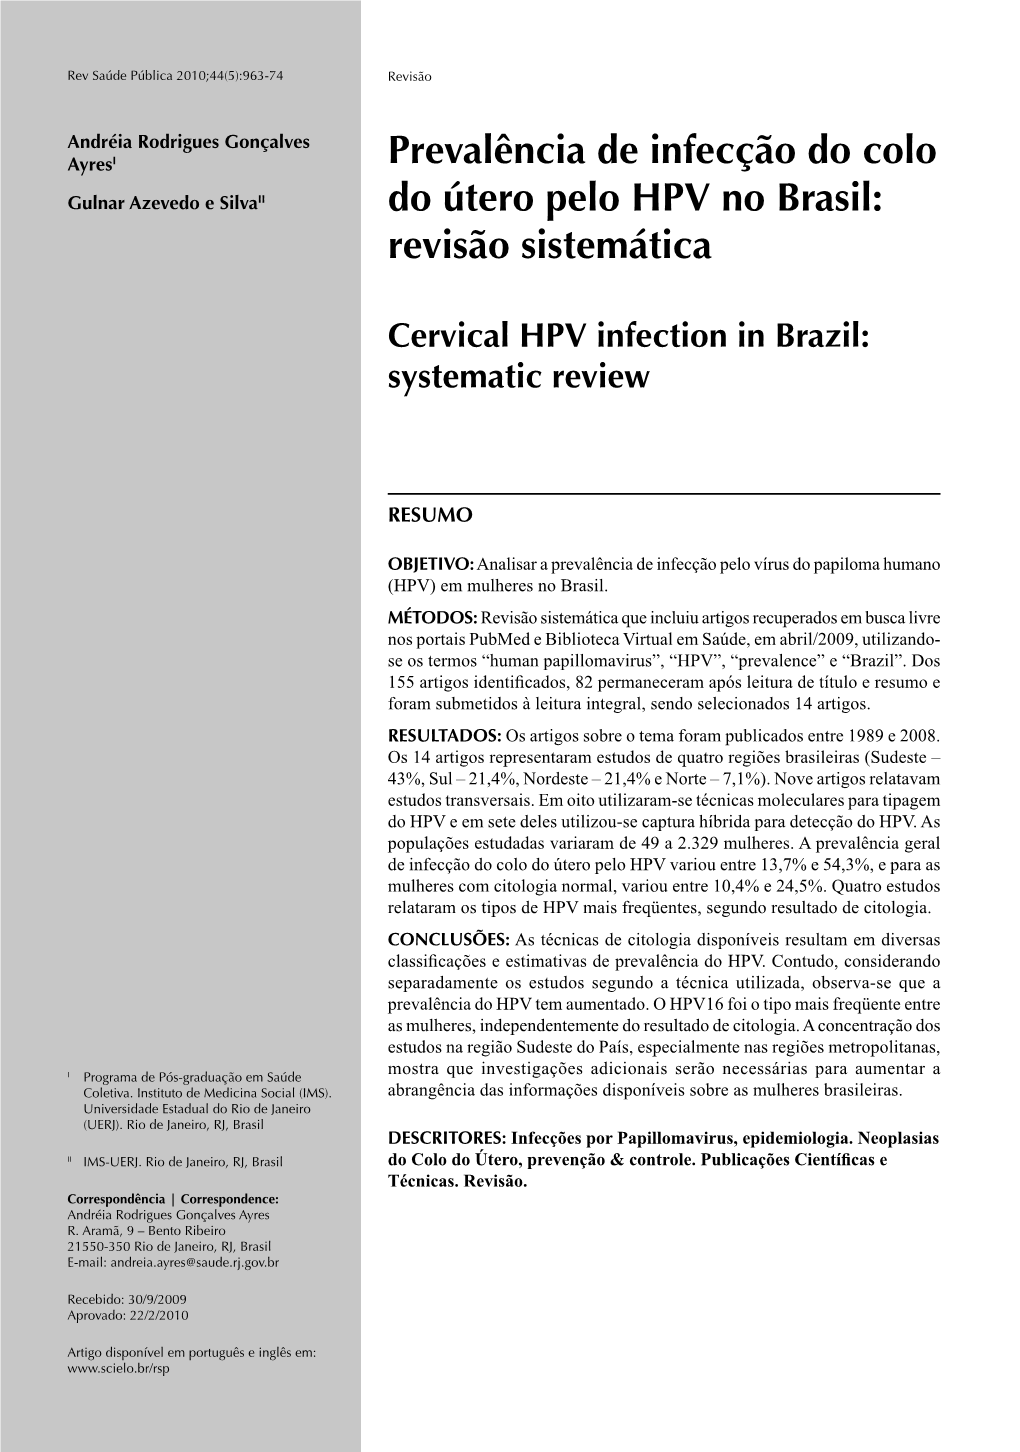 Cervical HPV Infection in Brazil: Systematic Review